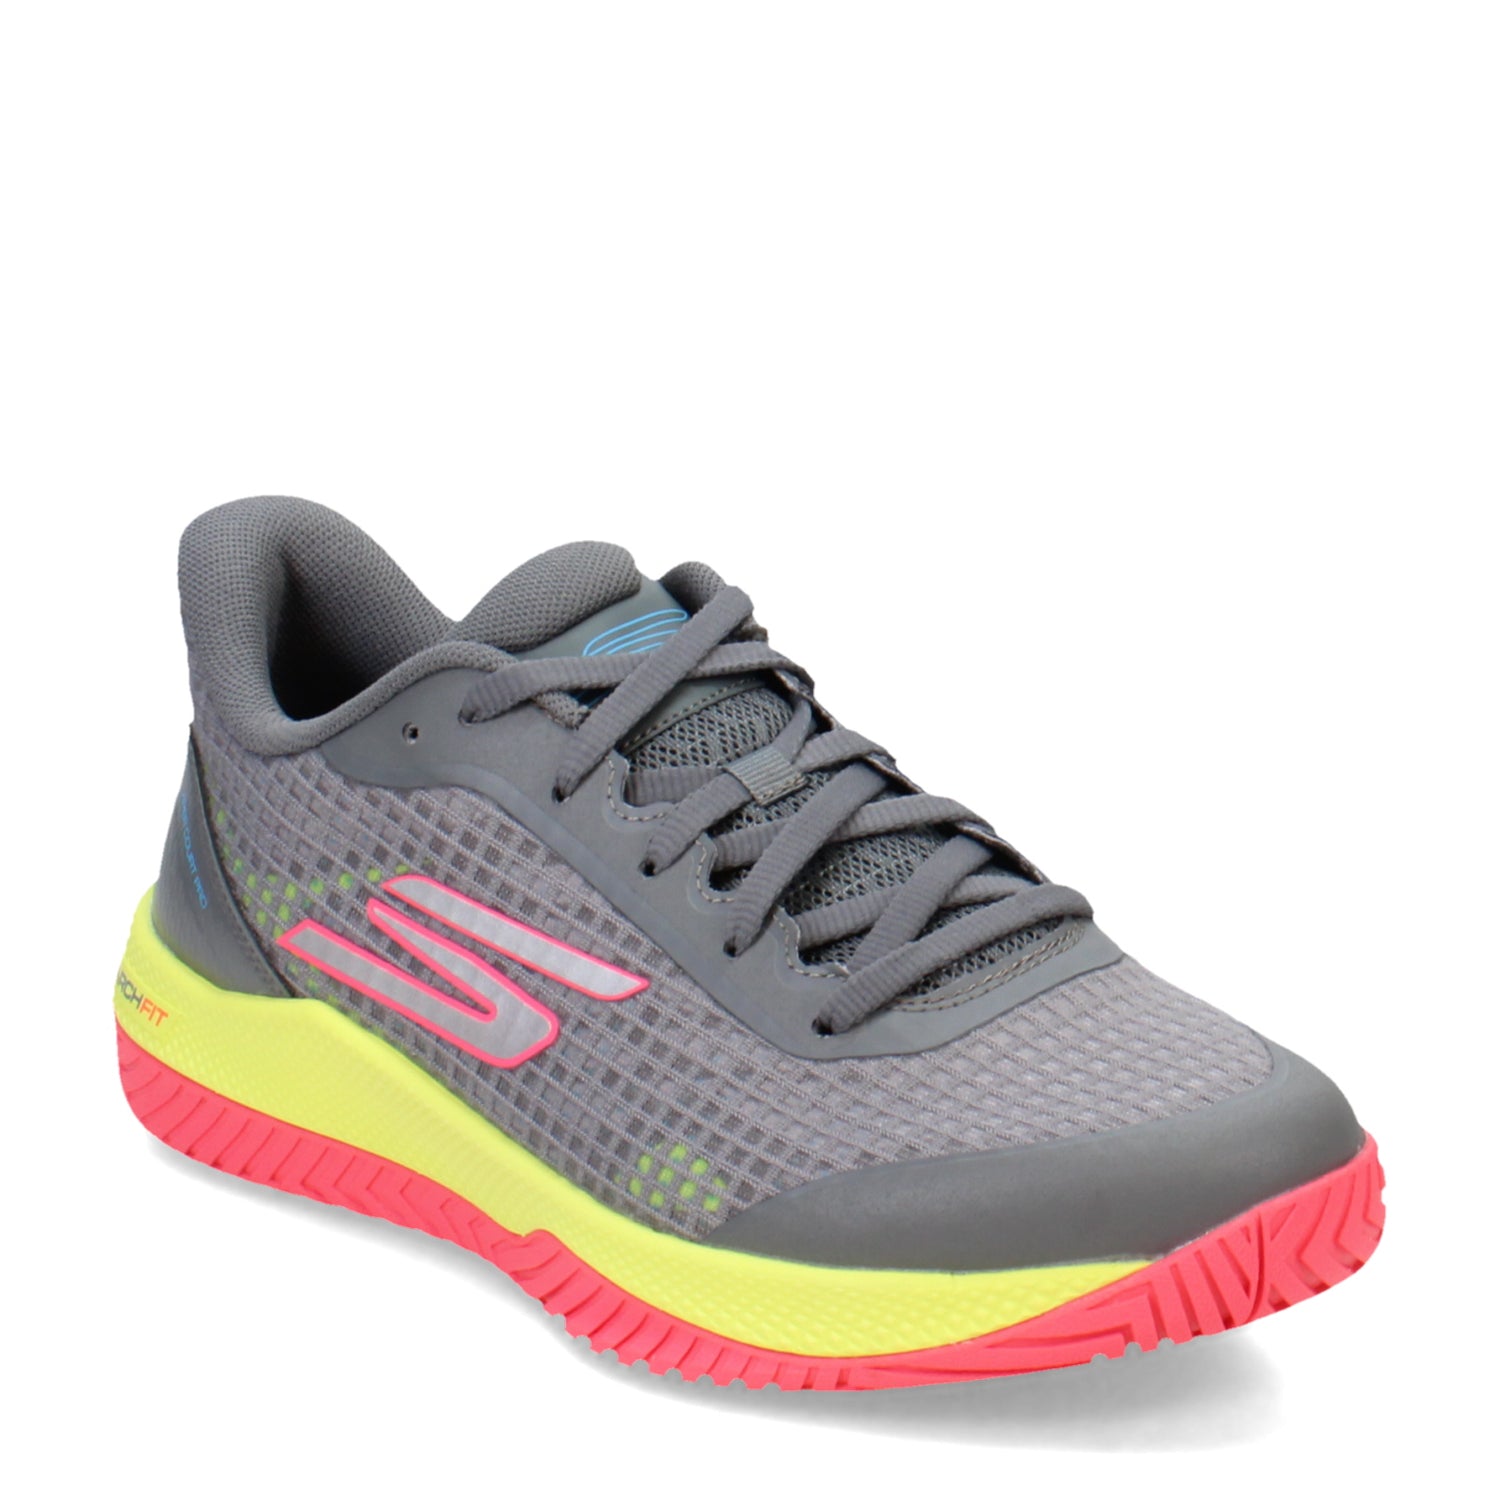 Women's Skechers, Relaxed Fit: Viper Court Pro - Arch Fit